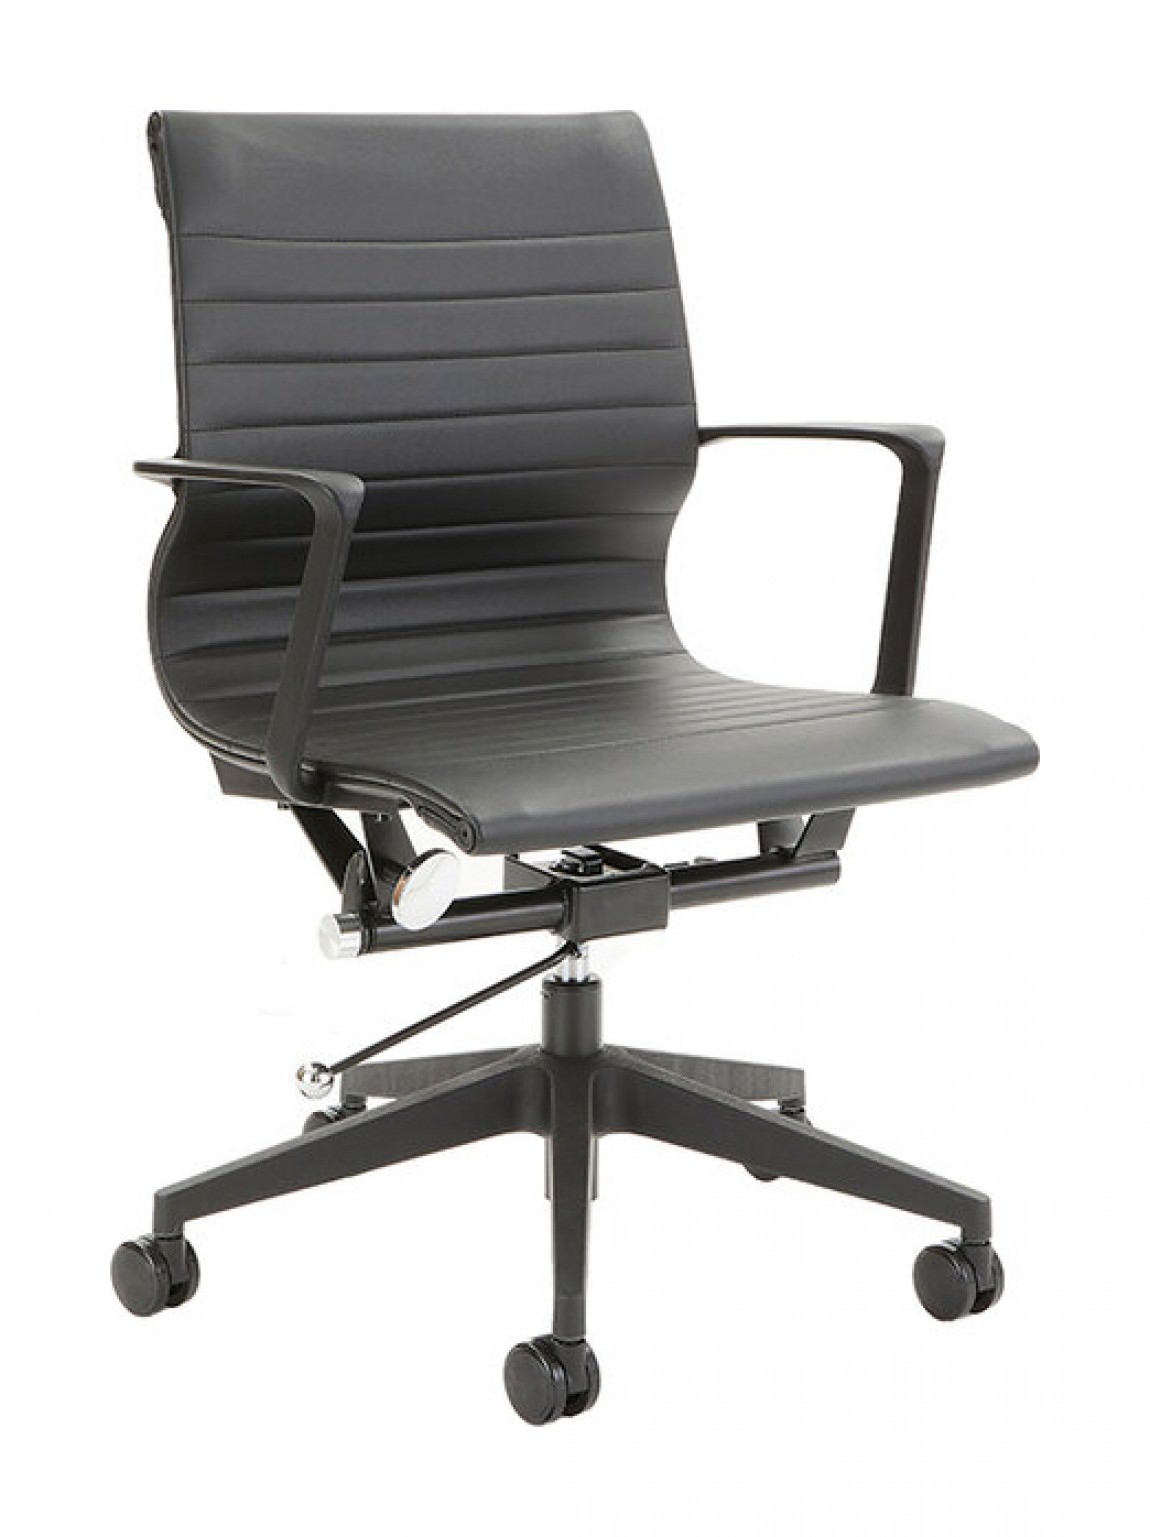 Low Back Conference Room Chair With Arms